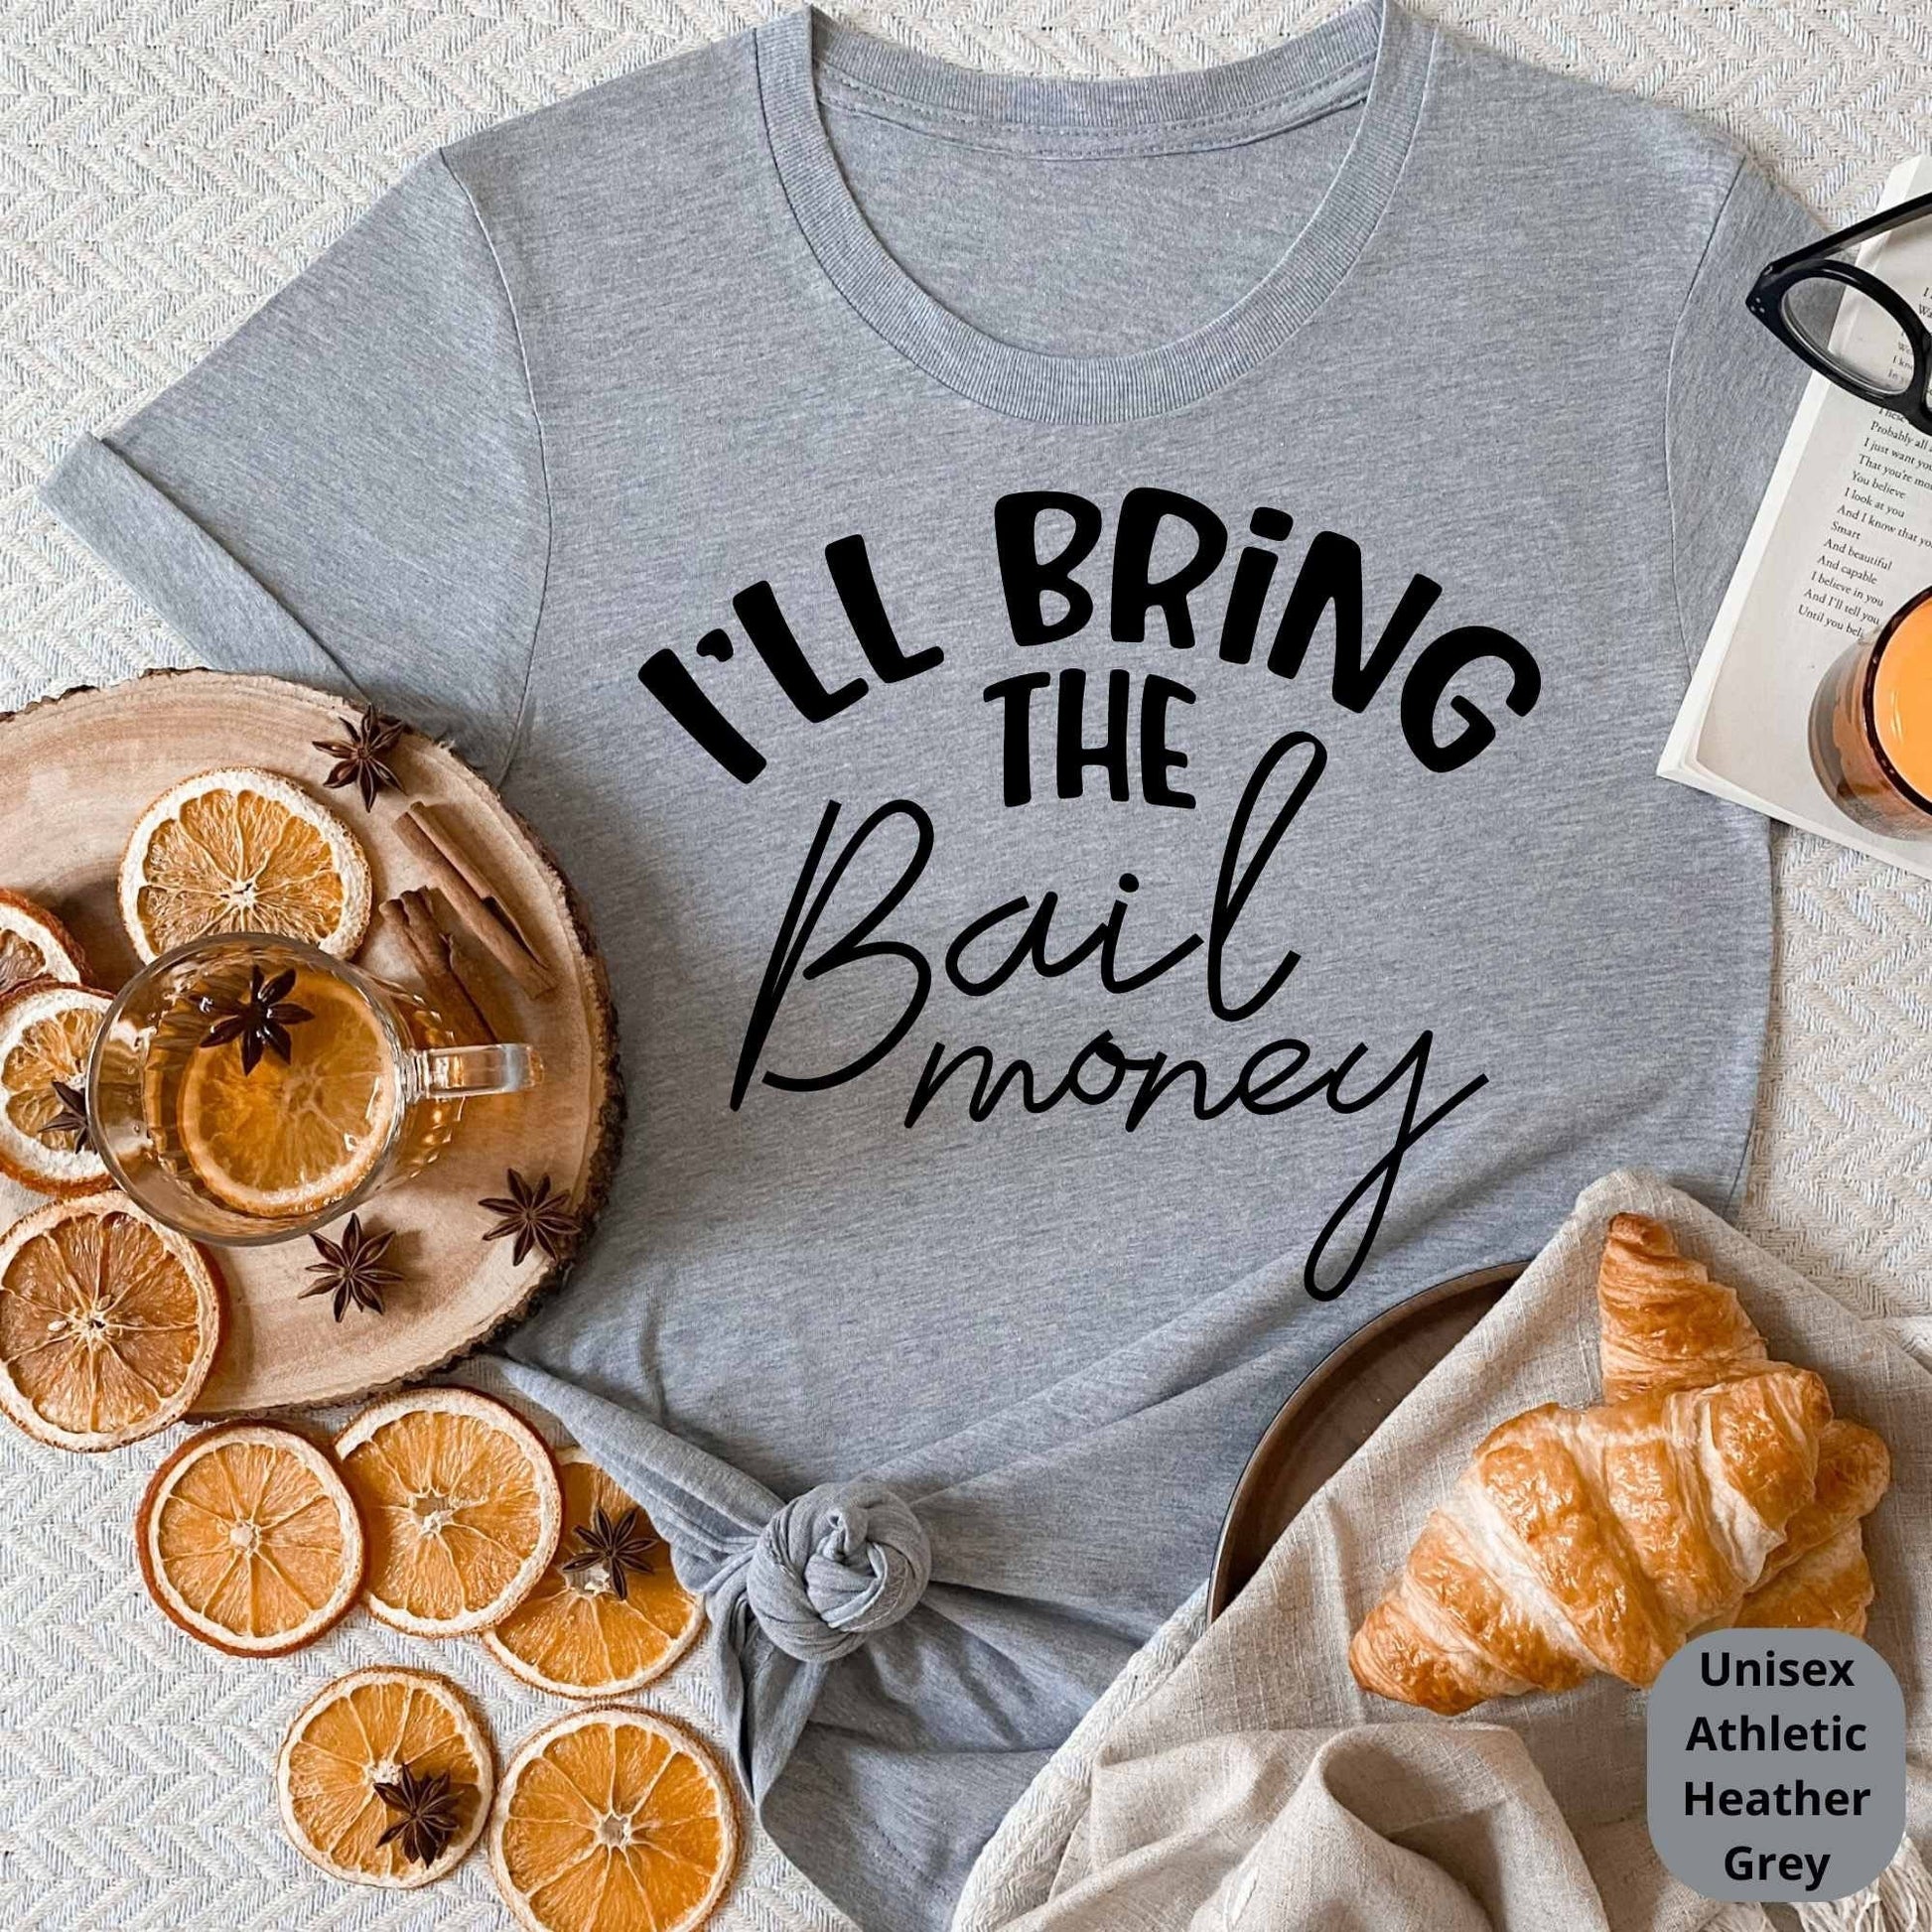 Bachelors Party Shirts, I'll Bring The, Guys Weekend, Funny Groomsmen Gifts, Birthday Party Shirts, Group Celebration T-Shirts, Road Trip HMDesignStudioUS